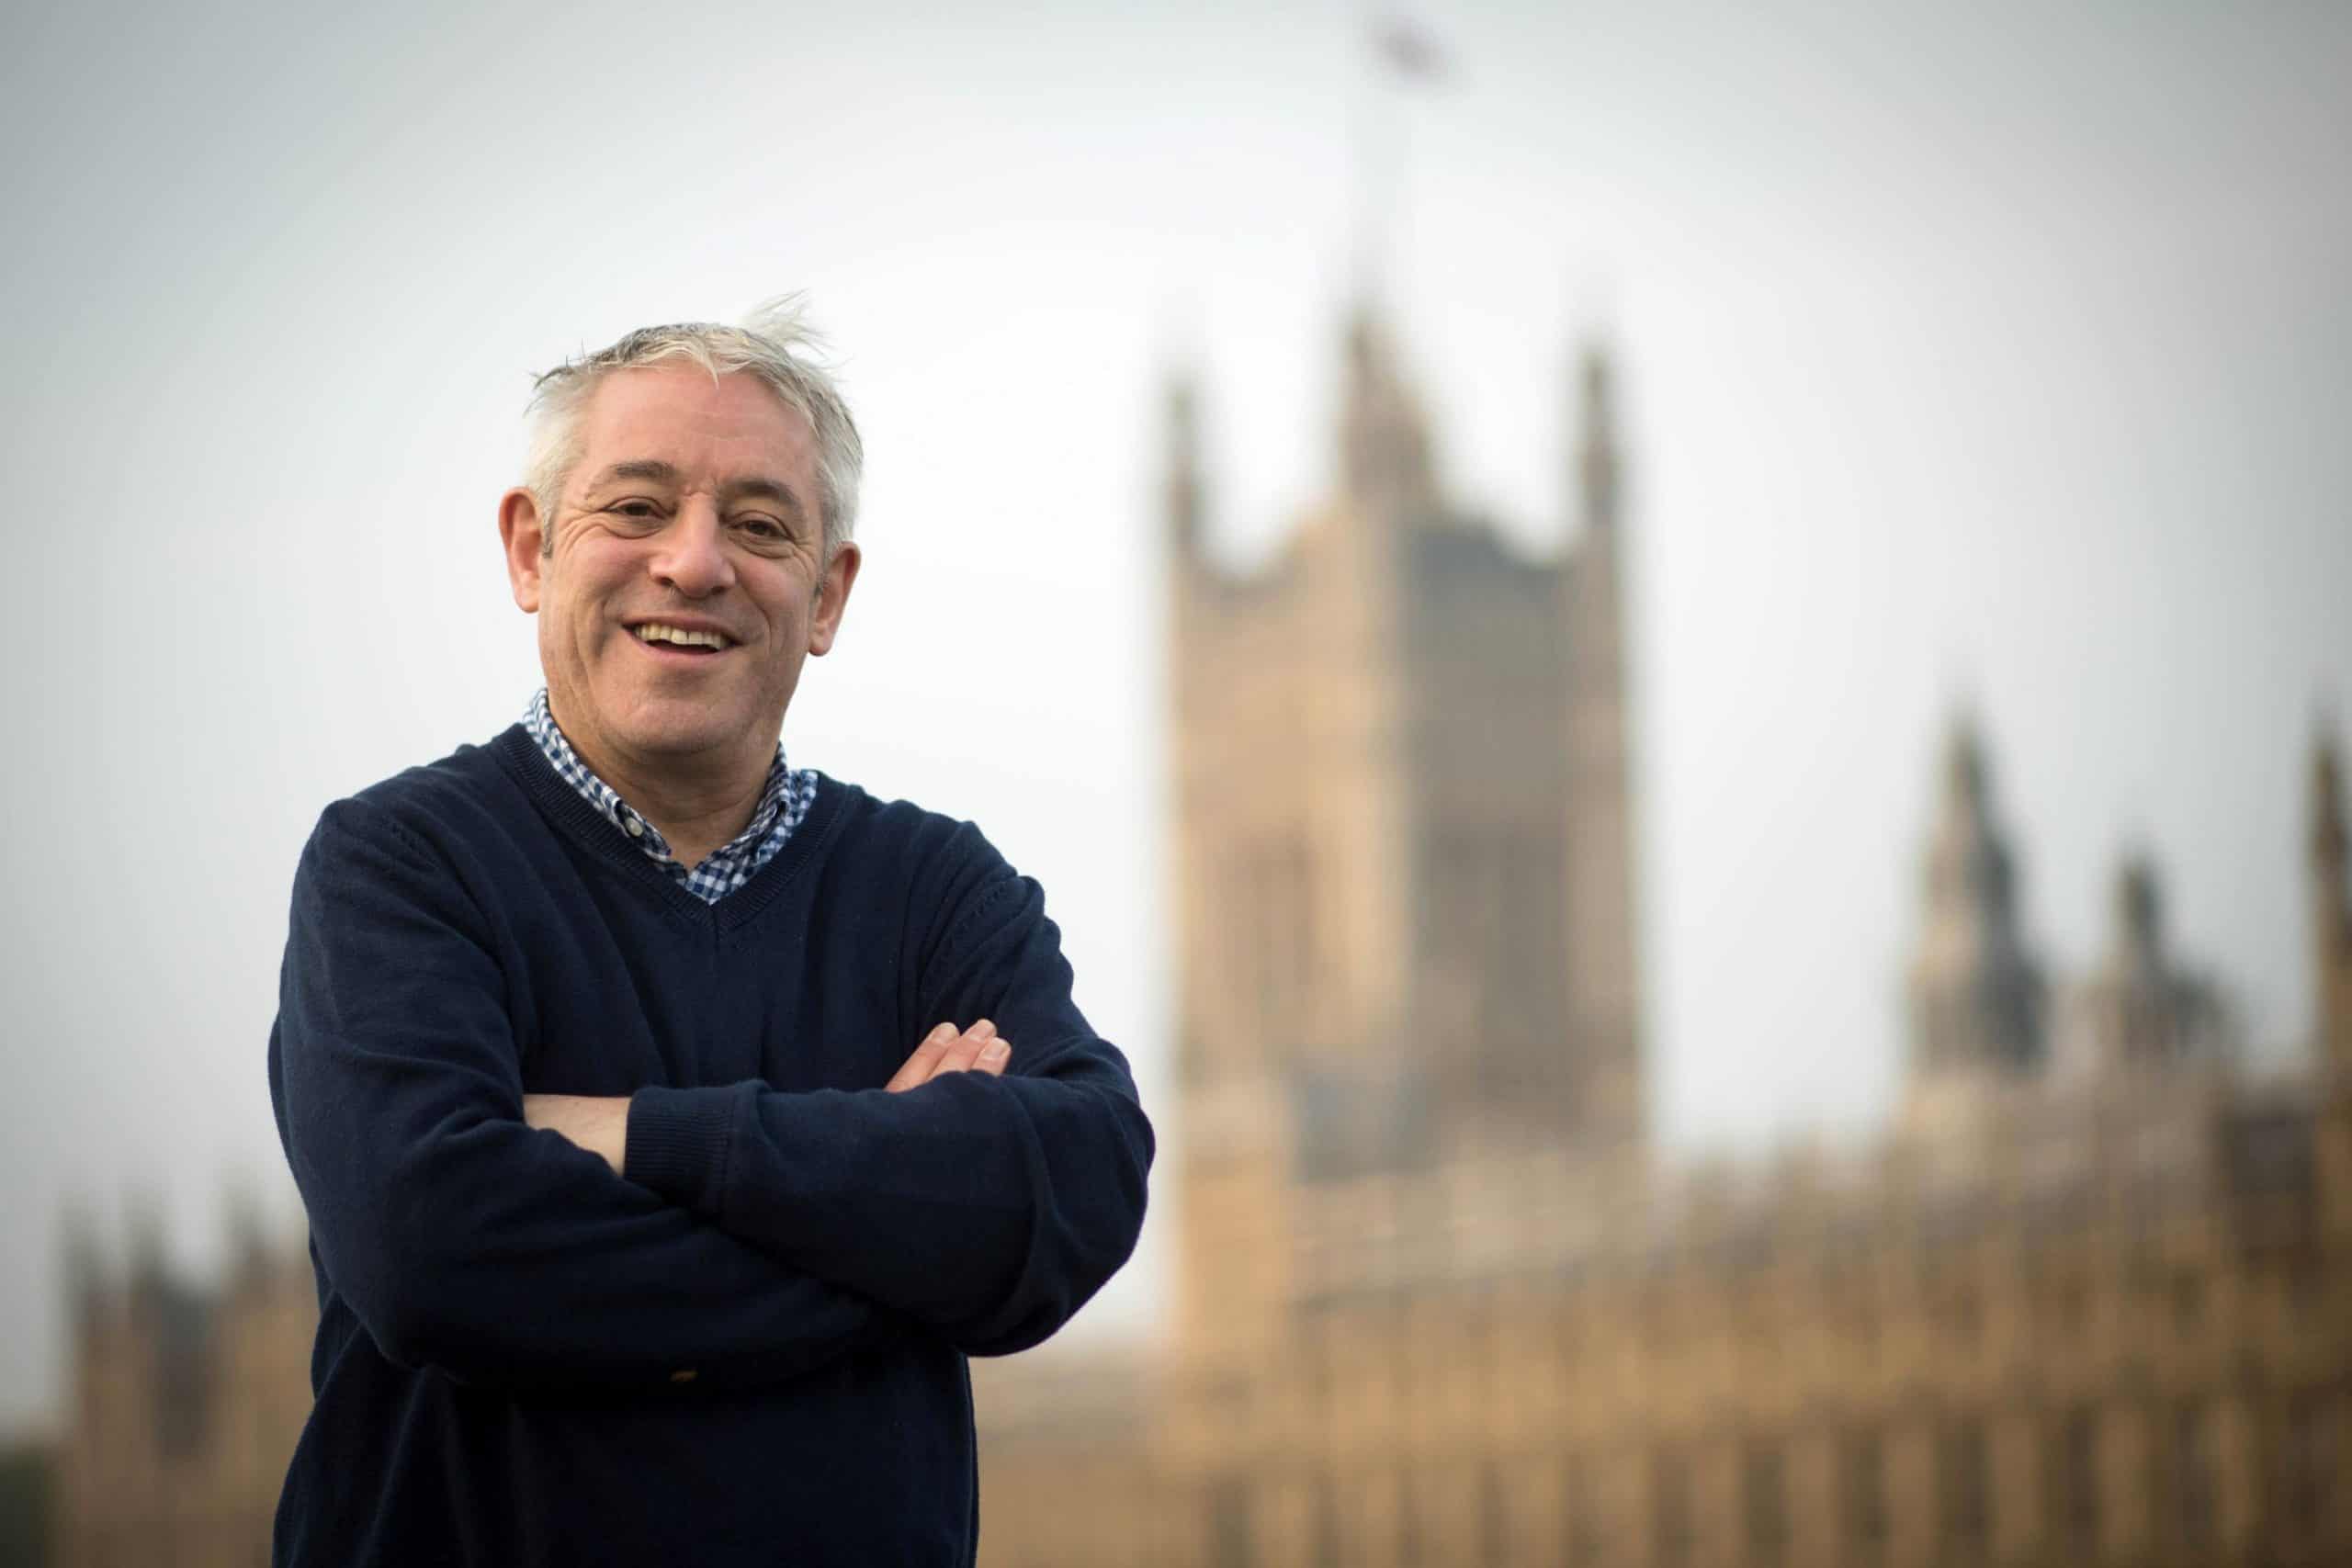 John Bercow defects to Labour, hitting out at ‘xenophobic’ Tories